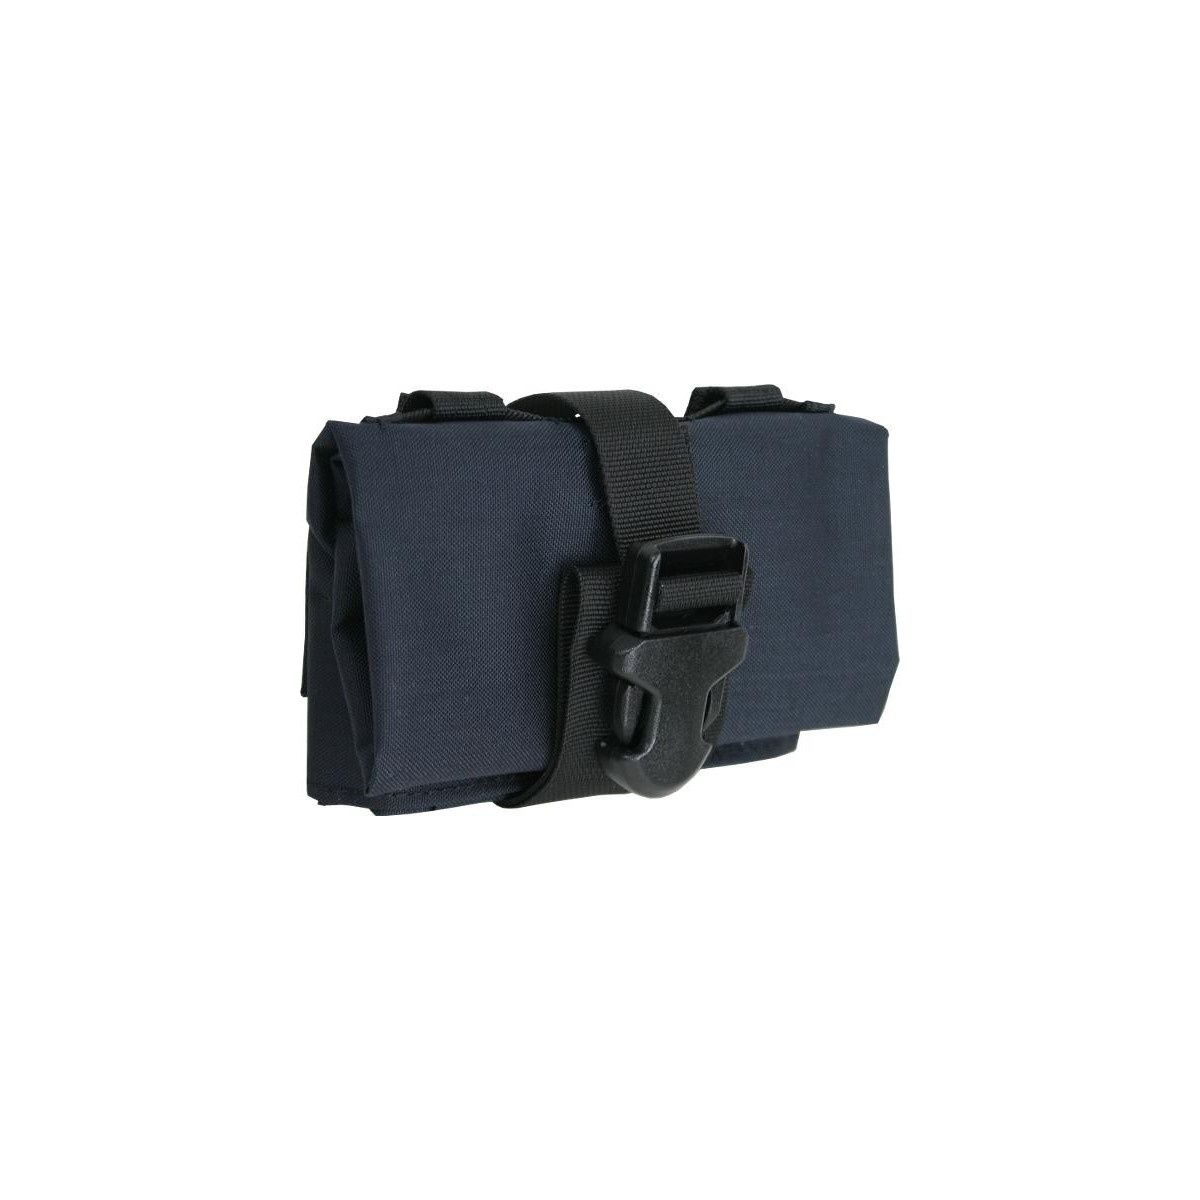 MOLLE drop bag 5 liters for ammunition and magazines